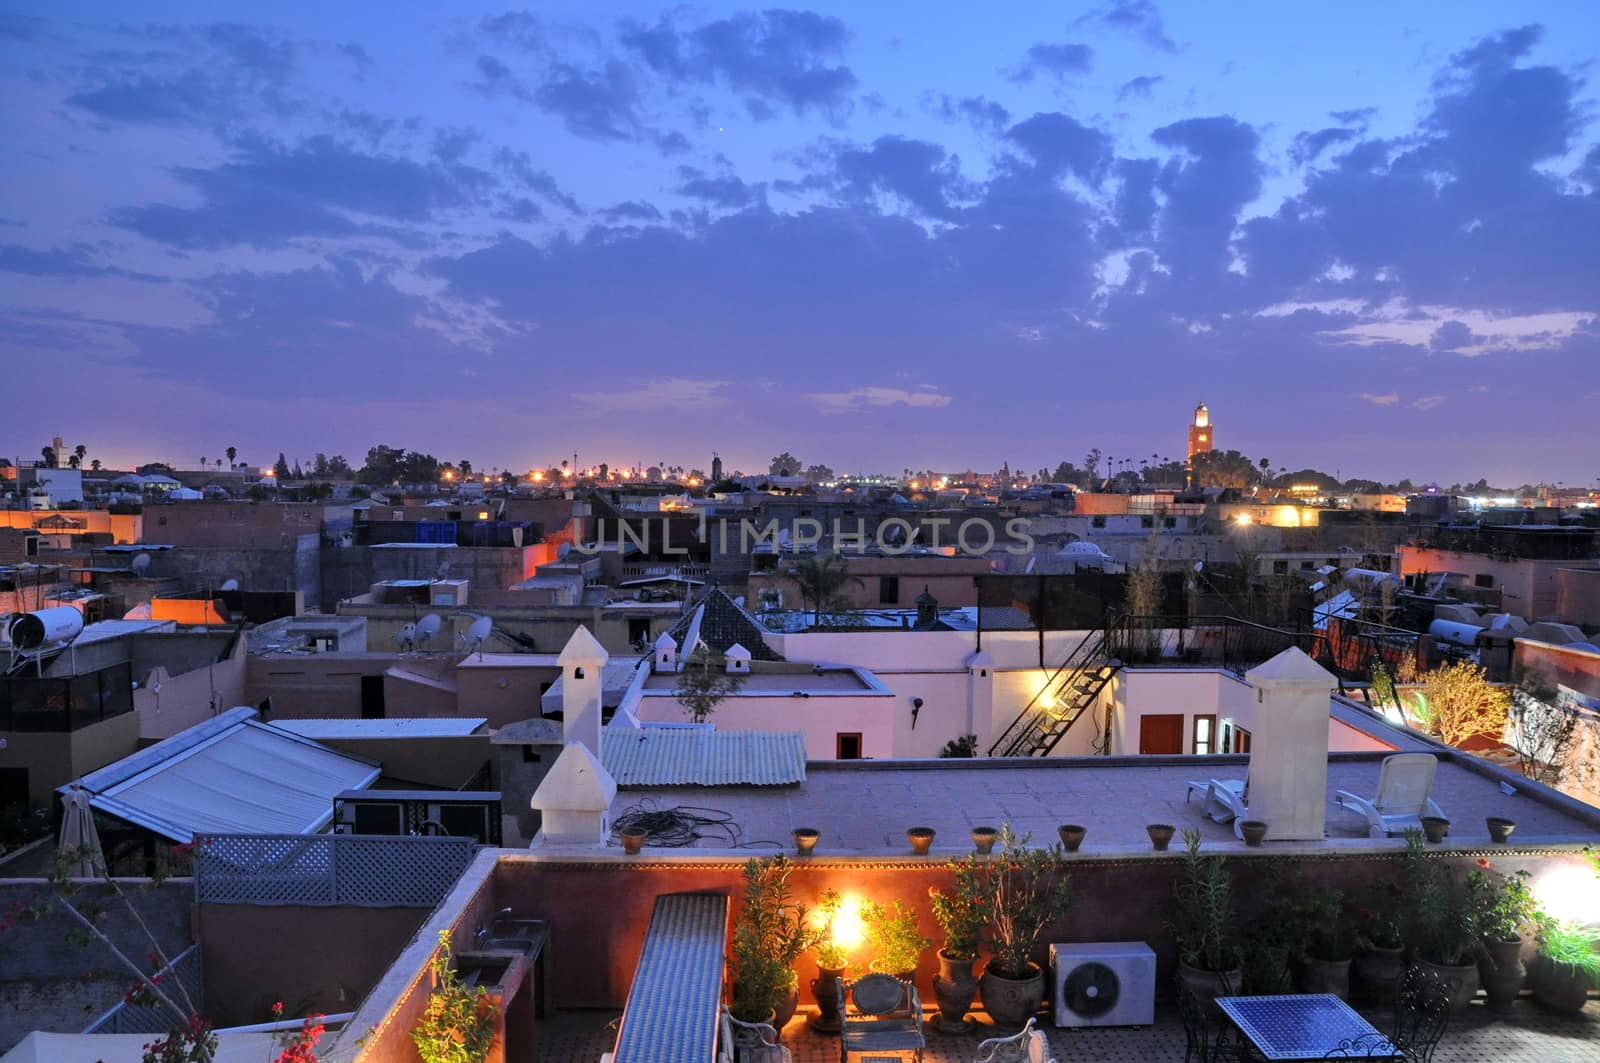 Marrakech rooftops at dusk by anderm